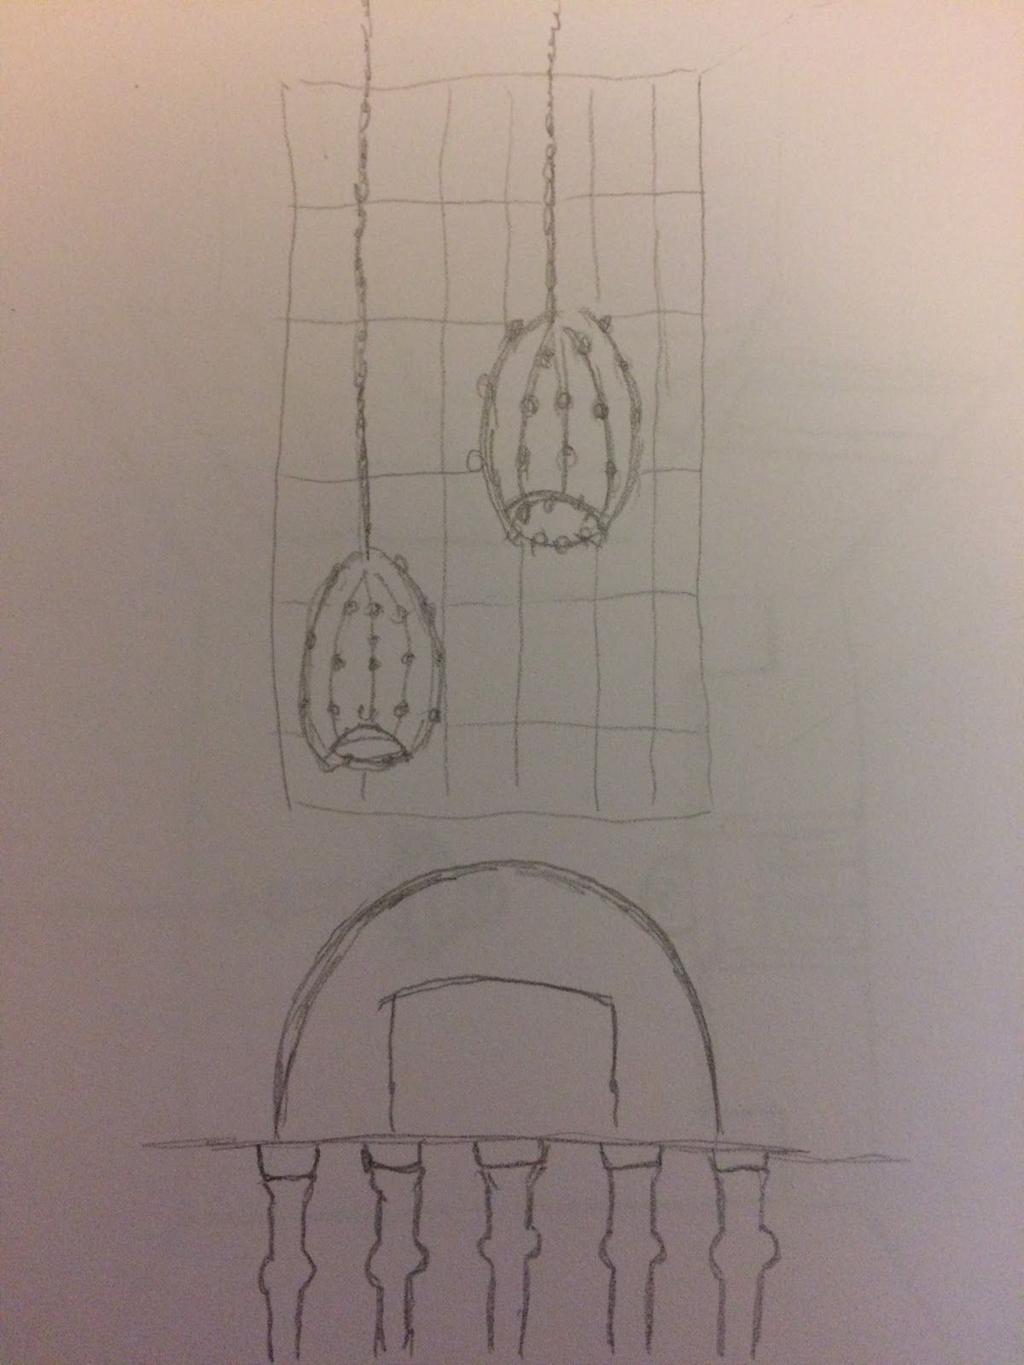 I sketched two chandeliers and the mirror behind.